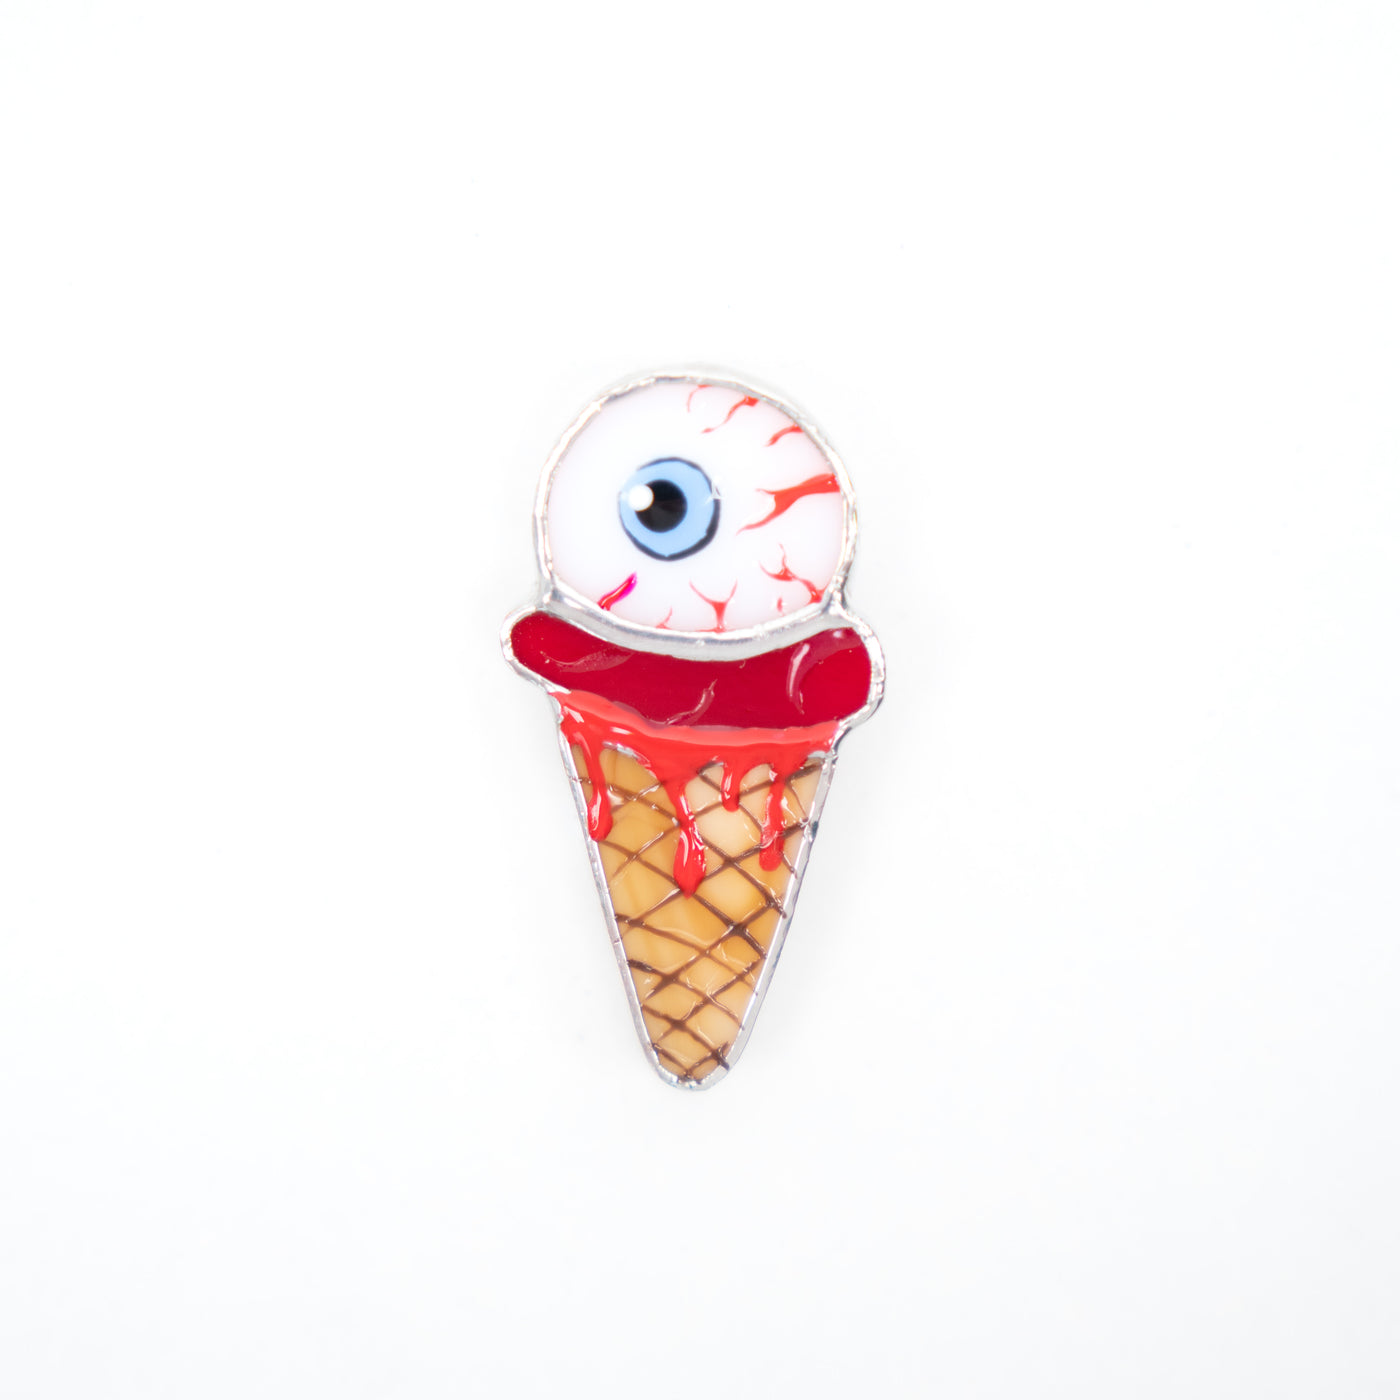 Stained glass ice-cream with the torn out eye brooch for Halloween